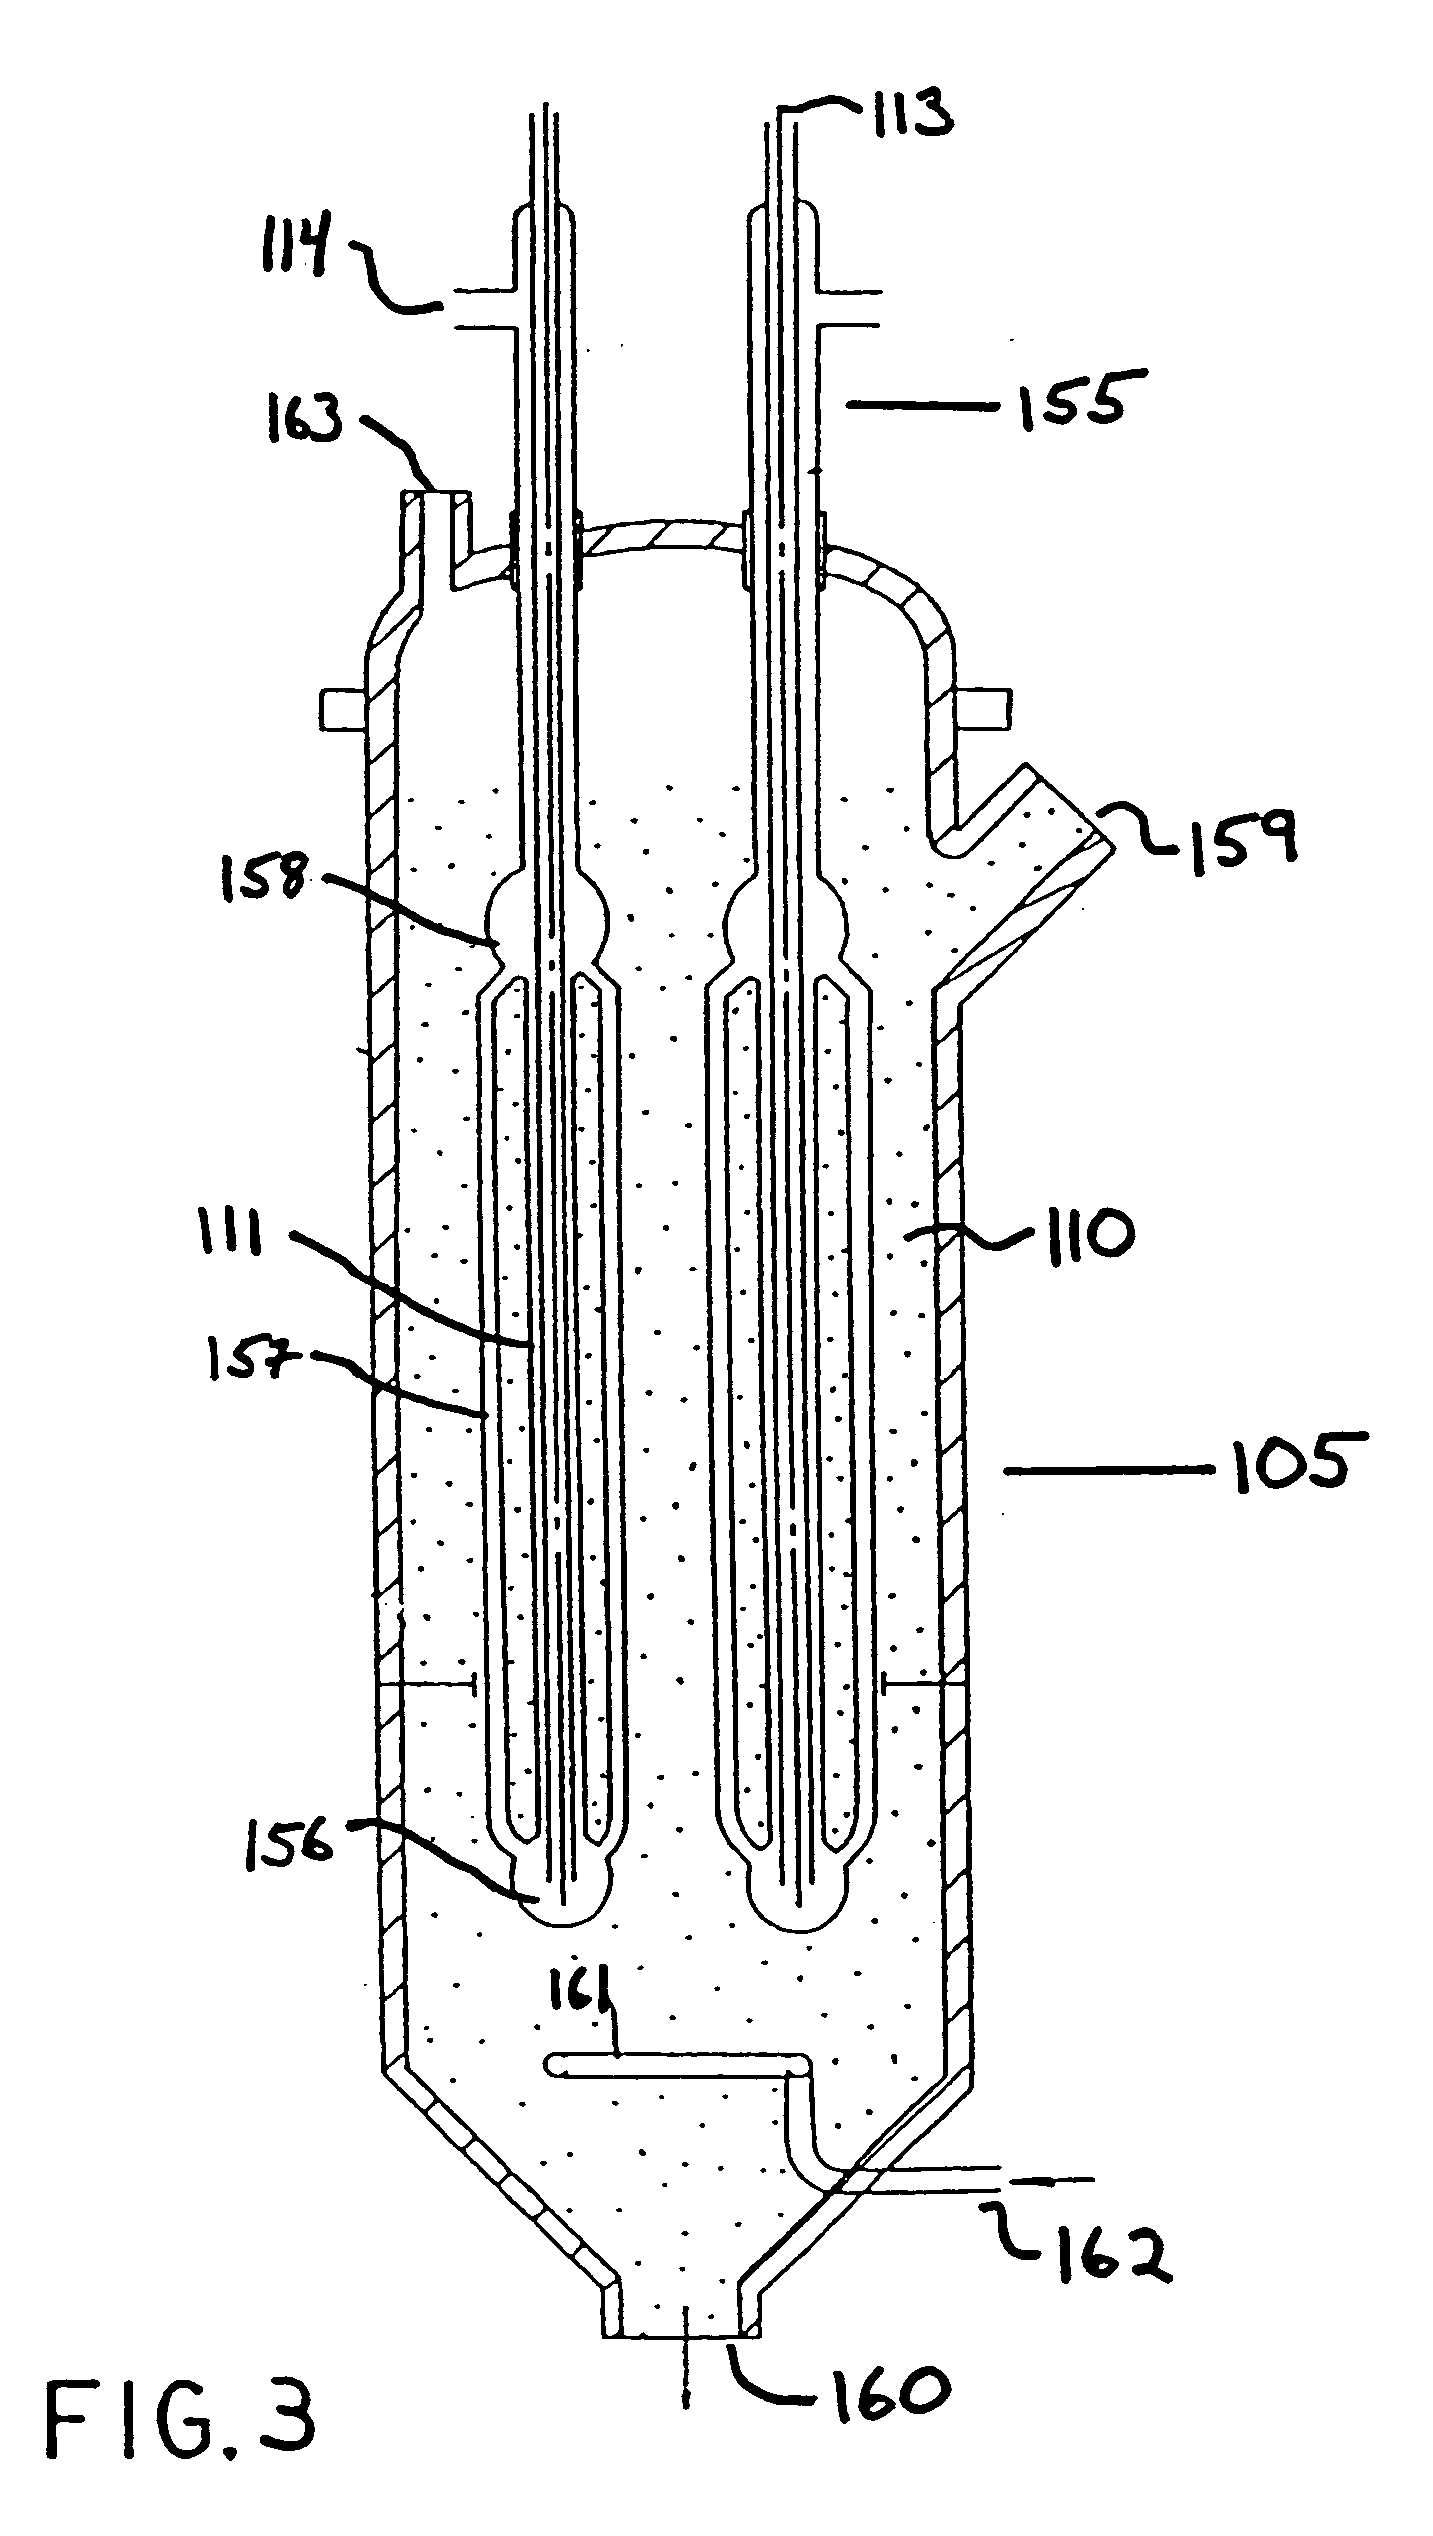 Process and apparatus for controlling catalyst temperature in a catalyst stripper